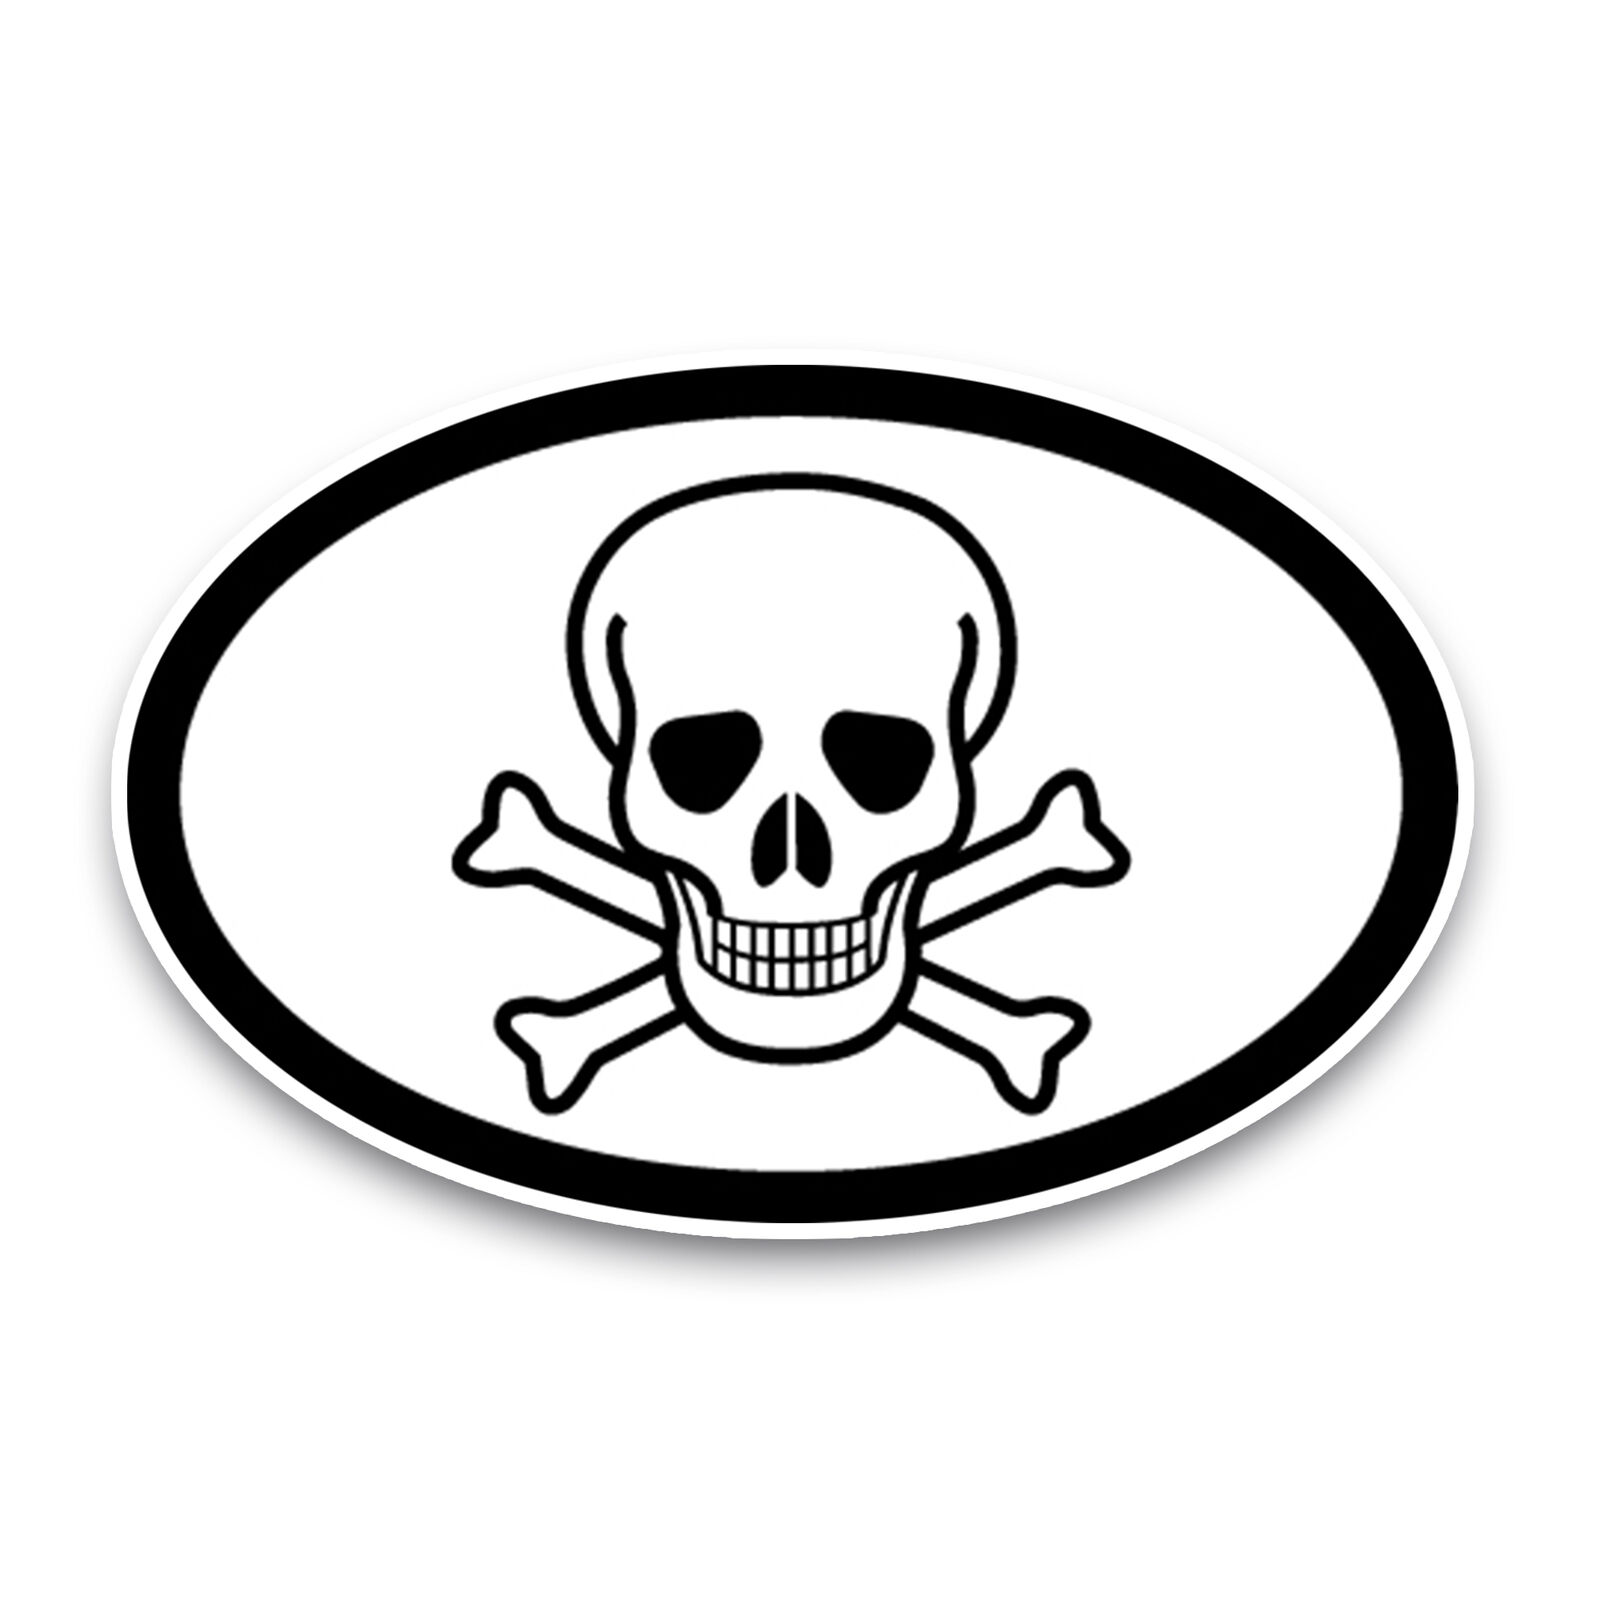 Skull and Crossbones Oval Magnet Decal, 4x6 Inches, Automotive Magnet